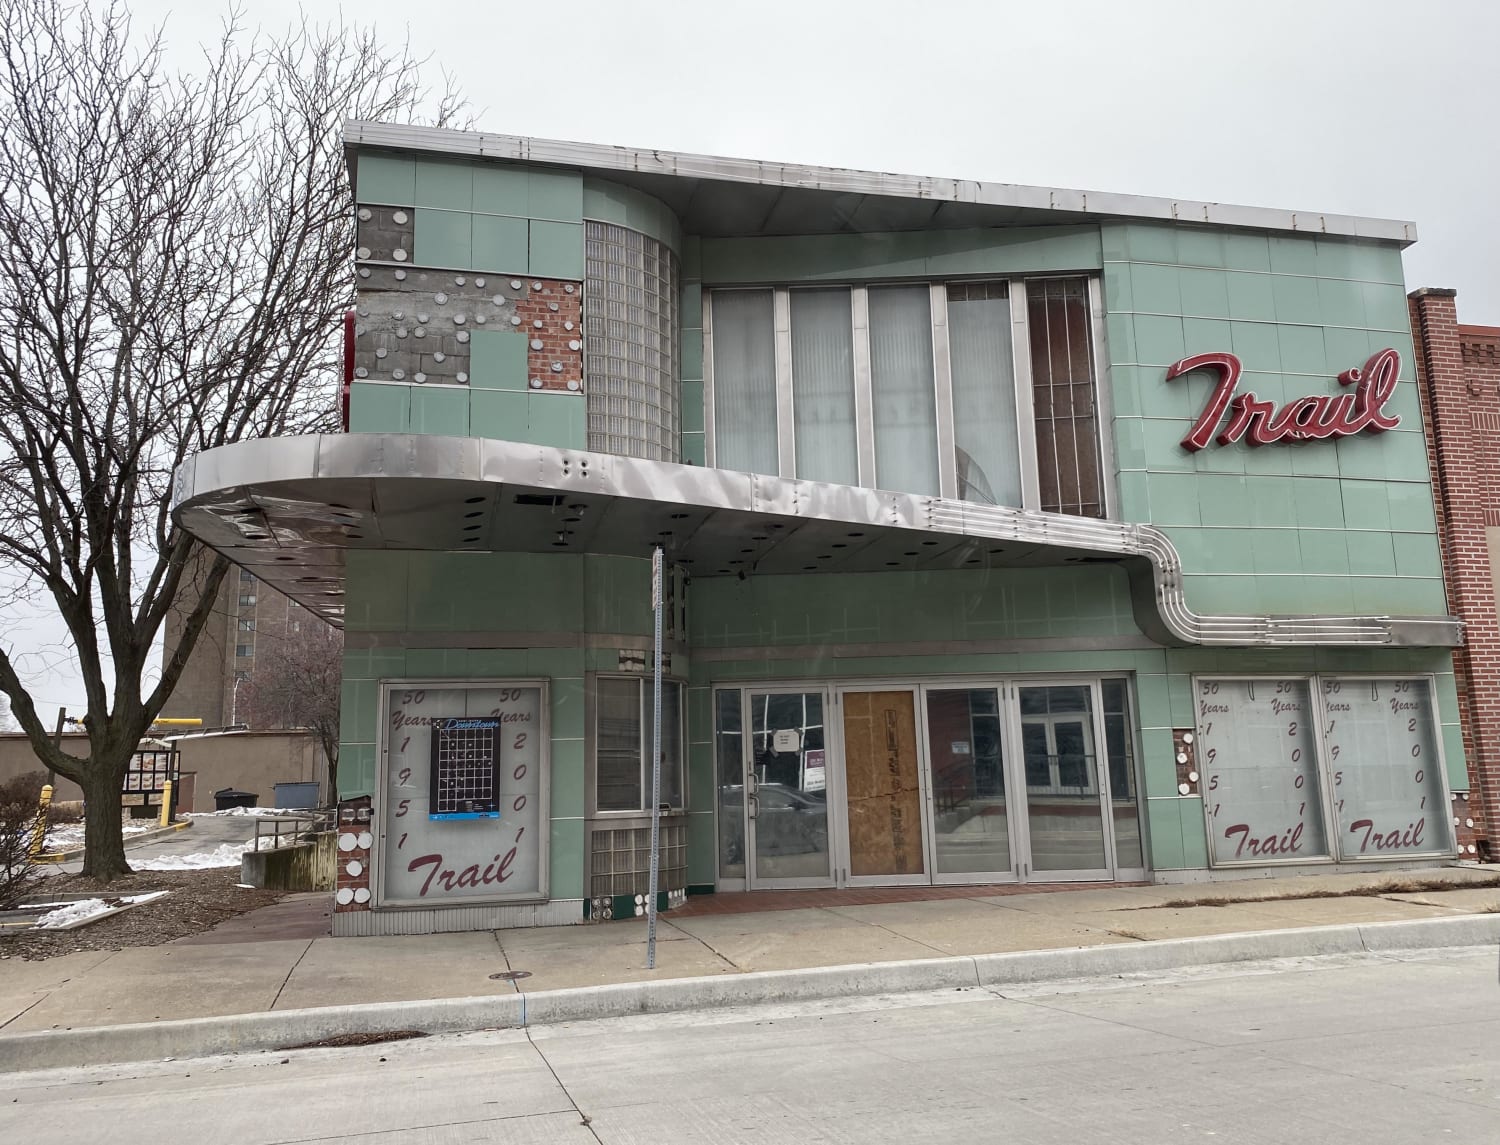 Abandoned movie theater in Saint Joseph, Missouri. Opened in 1951, closed in 2007.